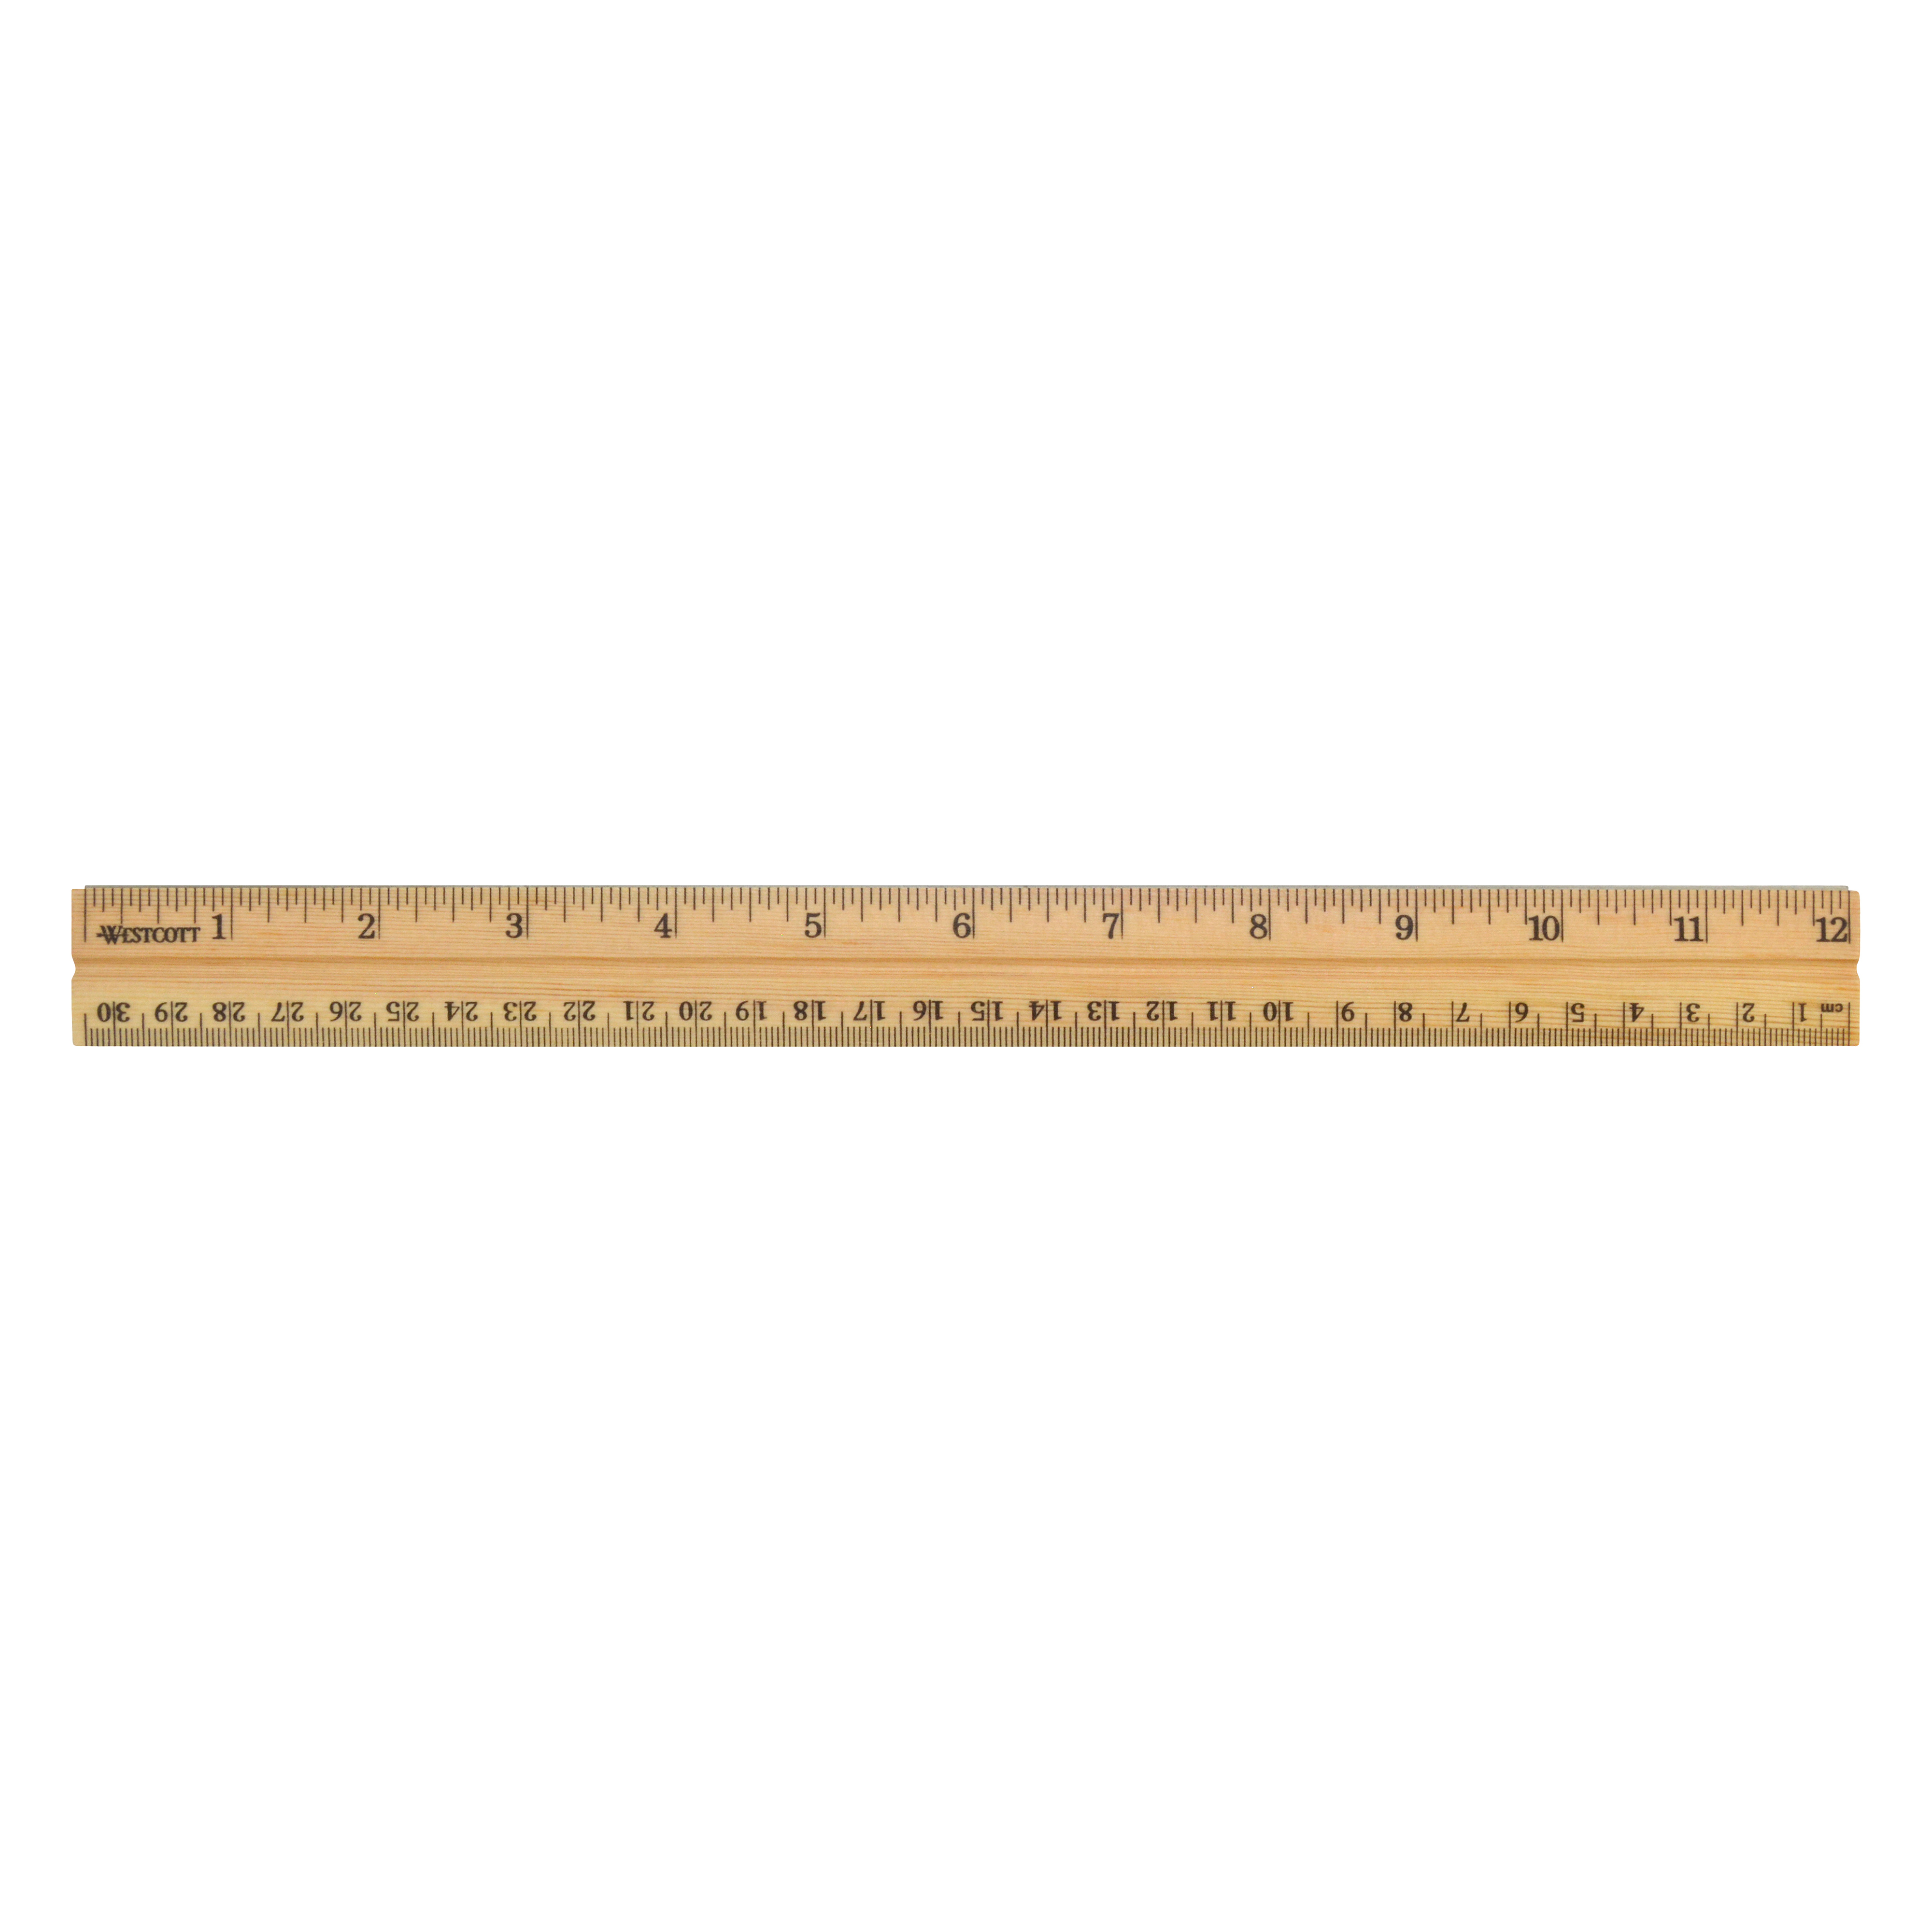 Westcott 12" Wood Ruler Measuring Metric and 1/16" Scale With Single Metal Edge (10377)